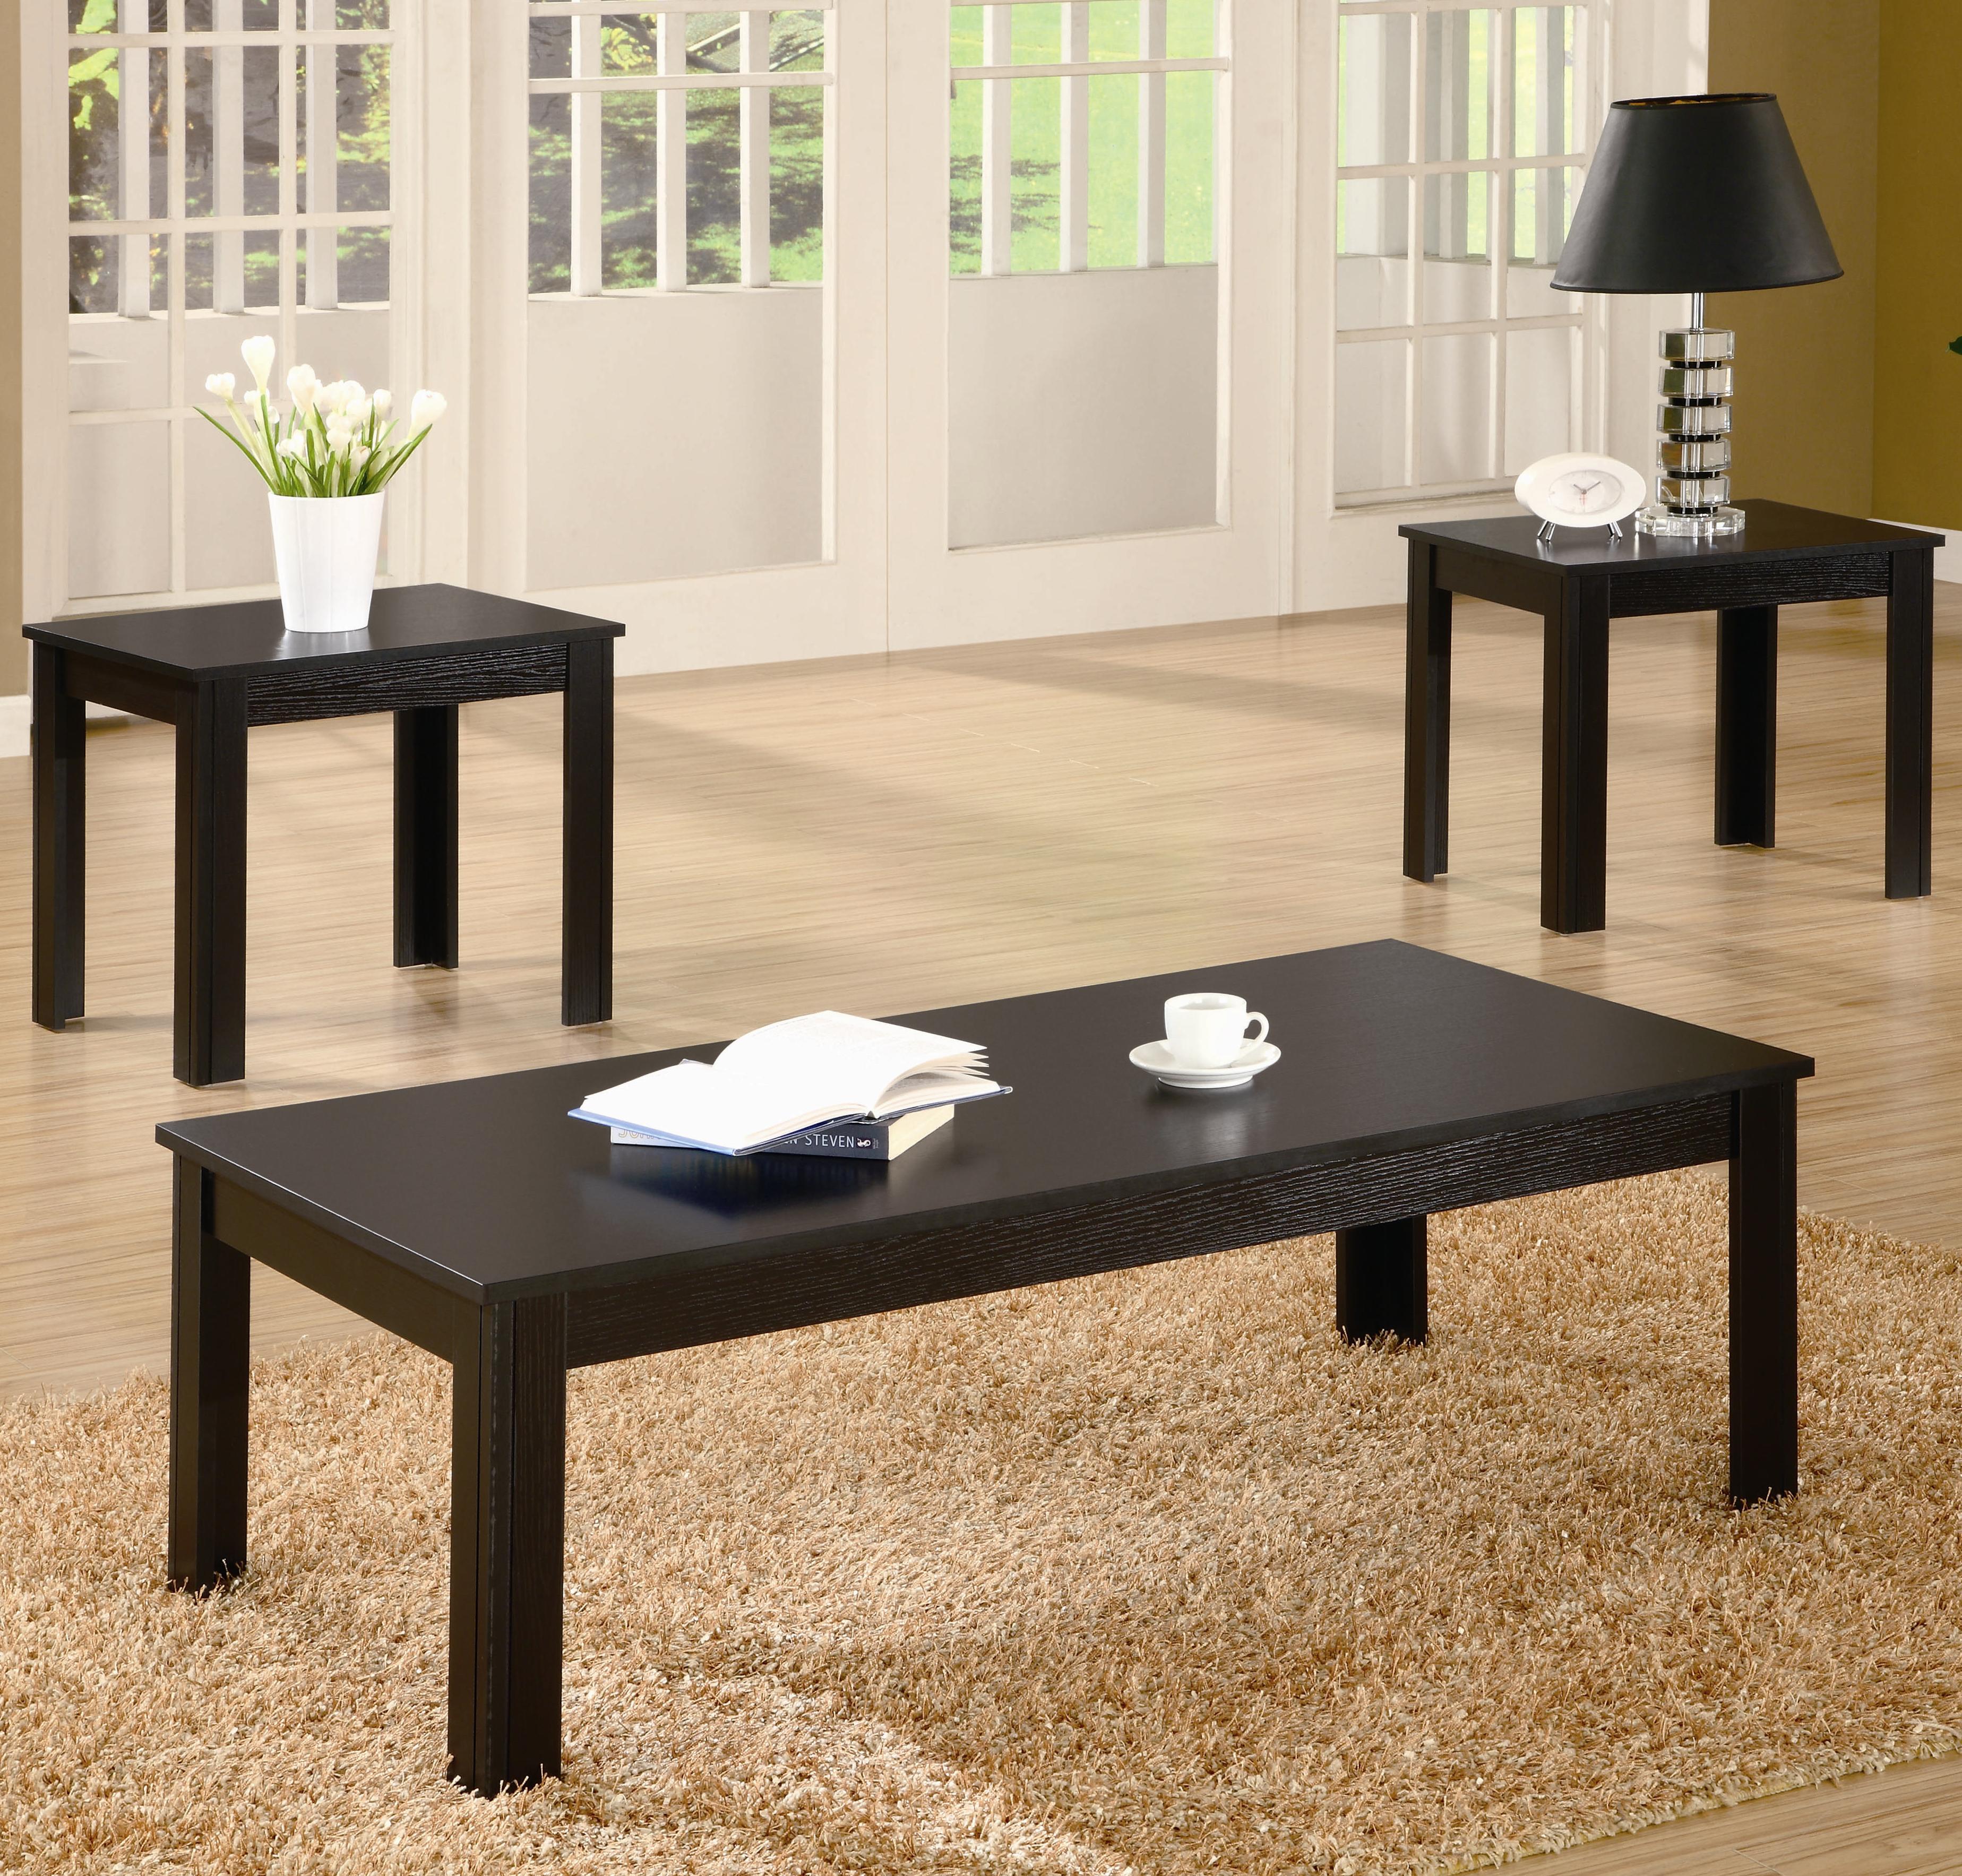 coffee tables ideas modern table and end set ashley black pieces occasional three living room decoration square rectangle shapes elegant furniture microfiber sofa over couch arm